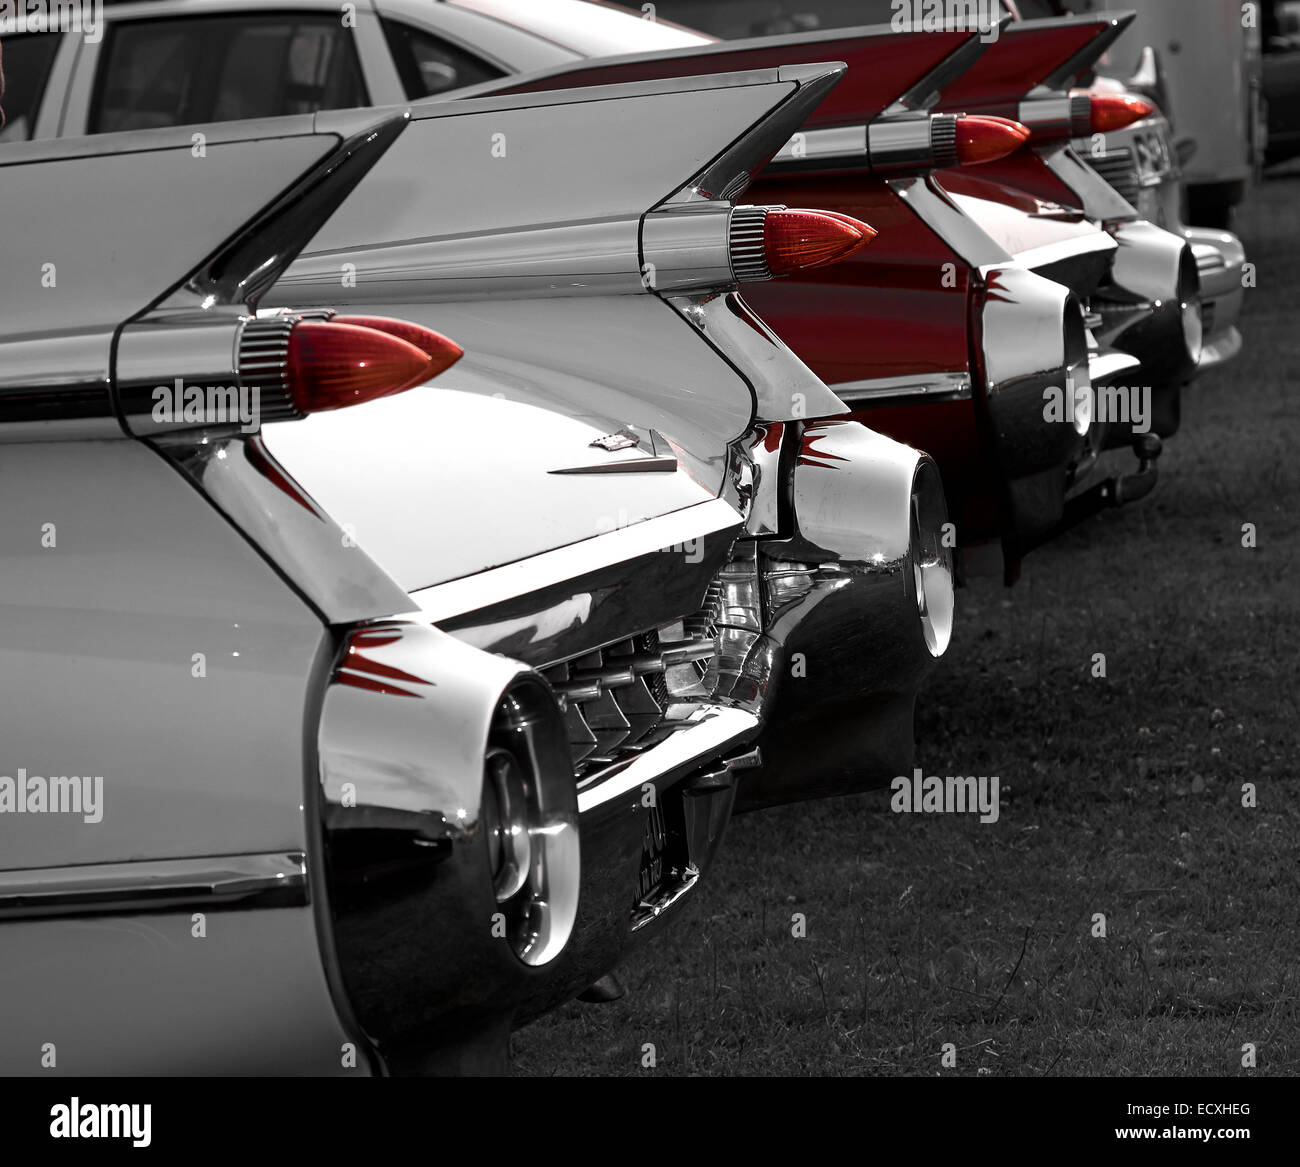 Fins and rear bumper on two vintage Cadillac Eldorado. Monochrome except for red of one car and tail-lights. Stock Photo